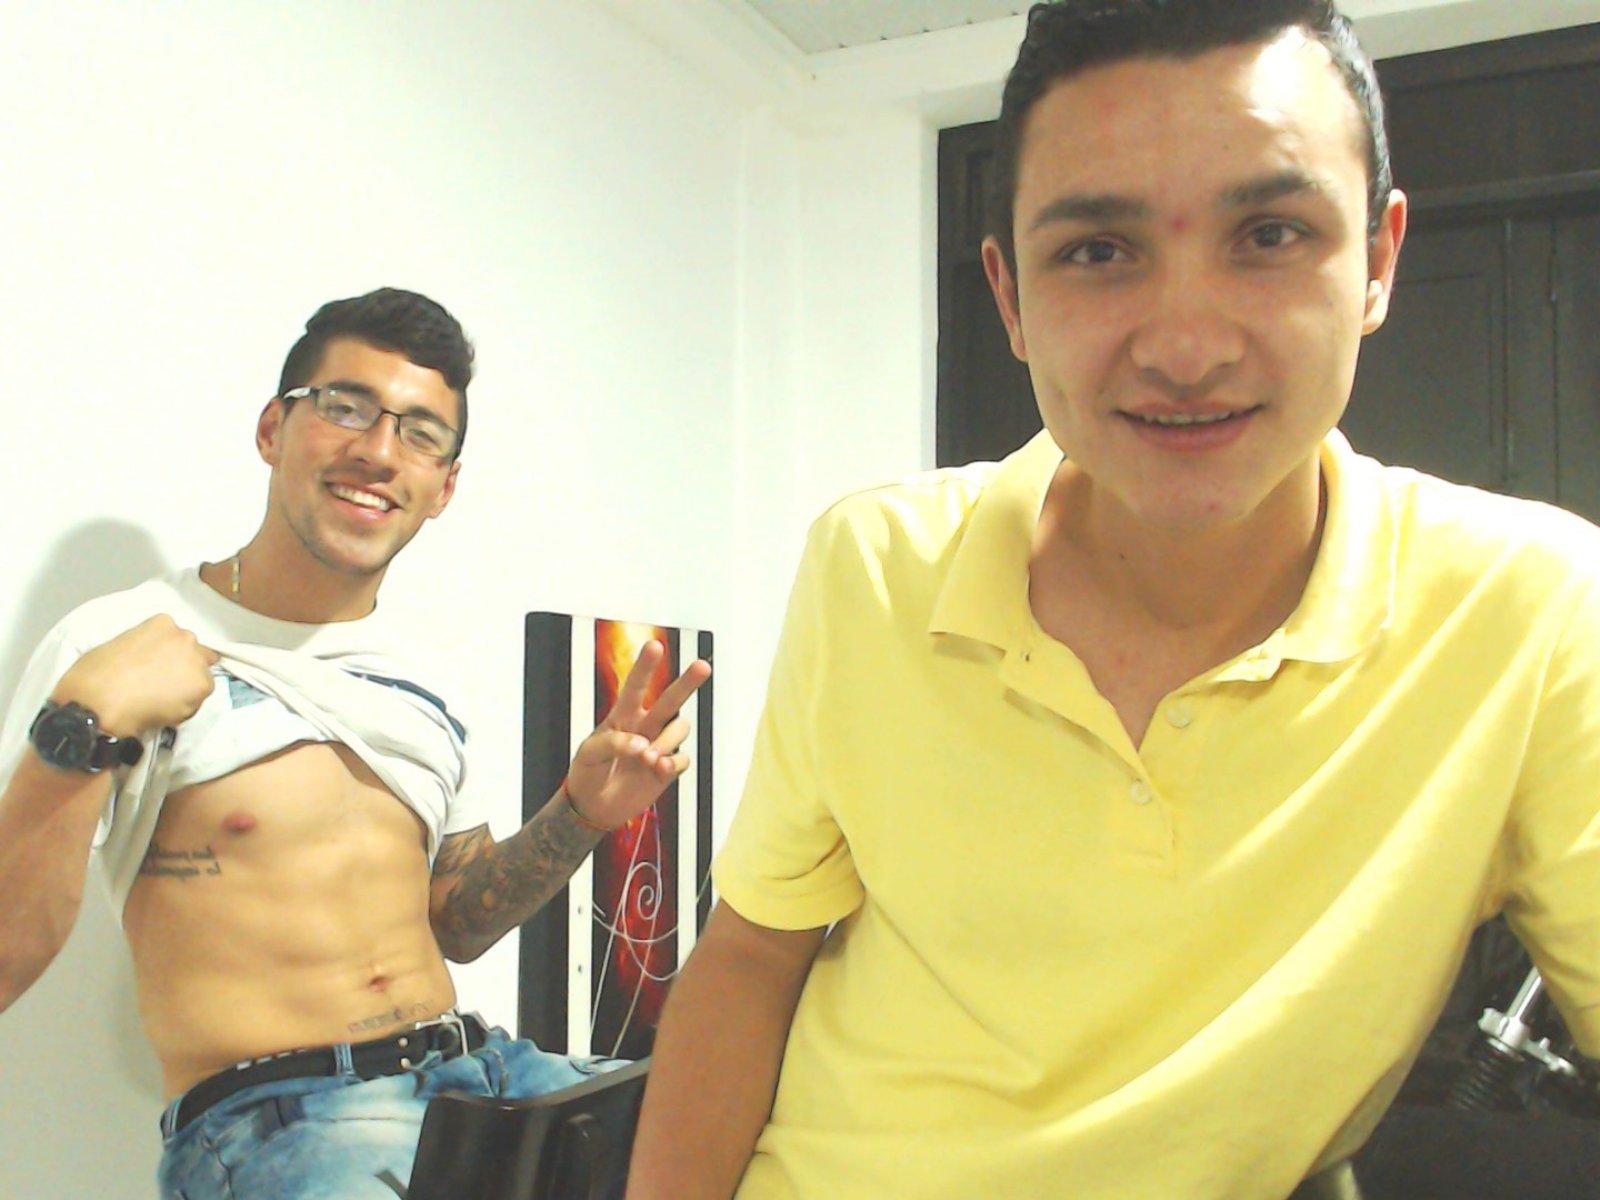 SebastanAndMike - Video chat hot with this Boys couple 